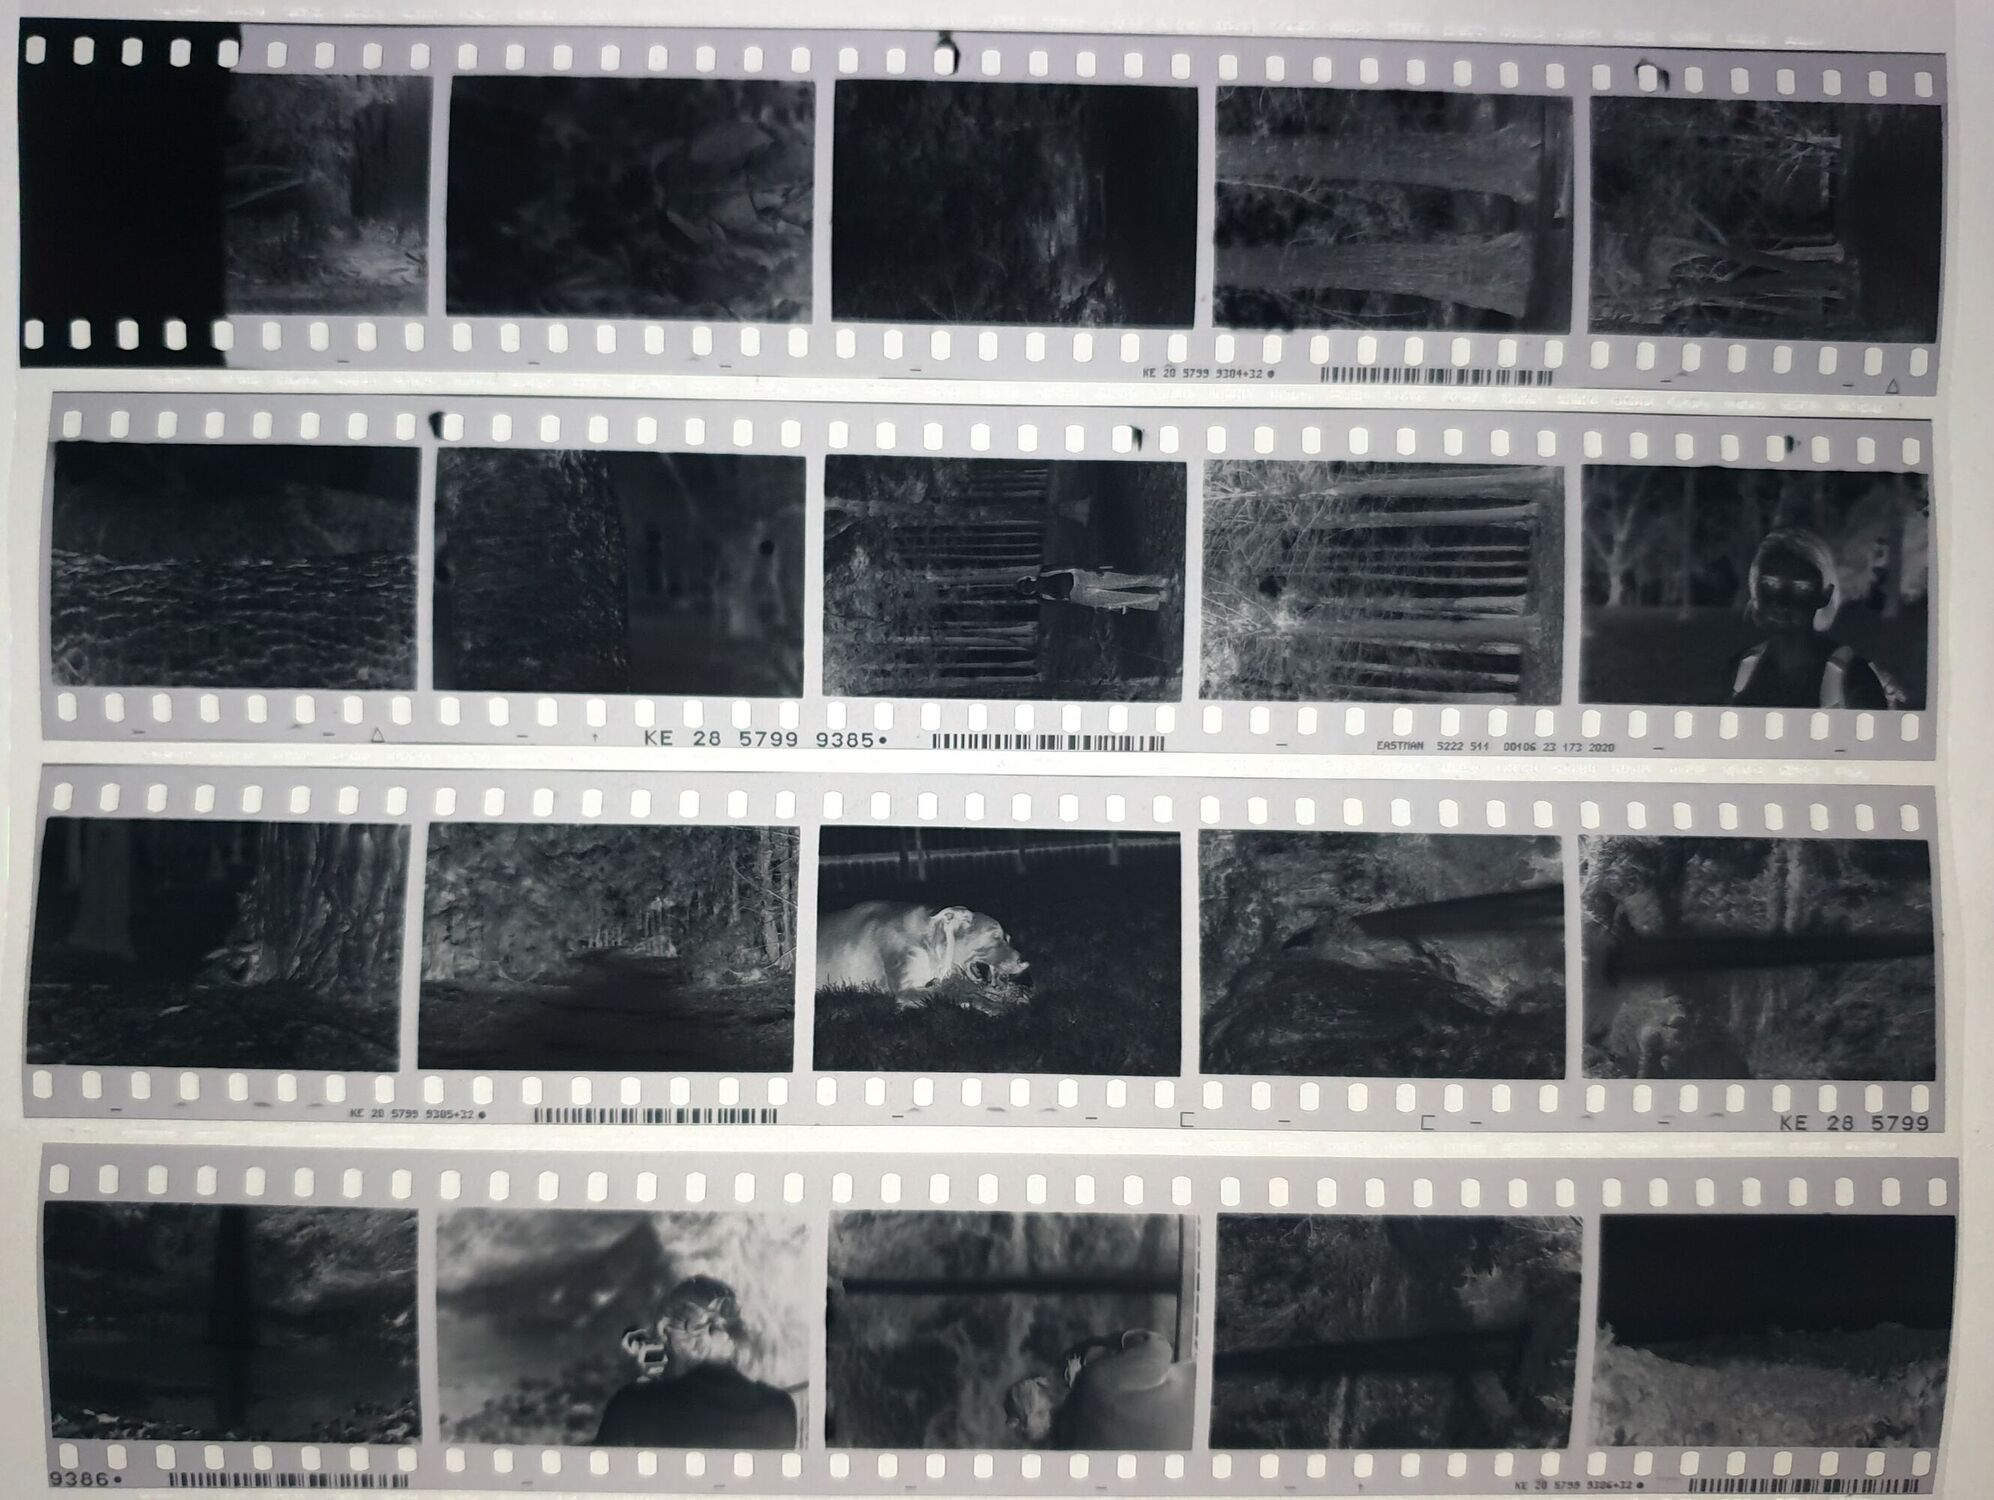 Negatives mostly properly exposed